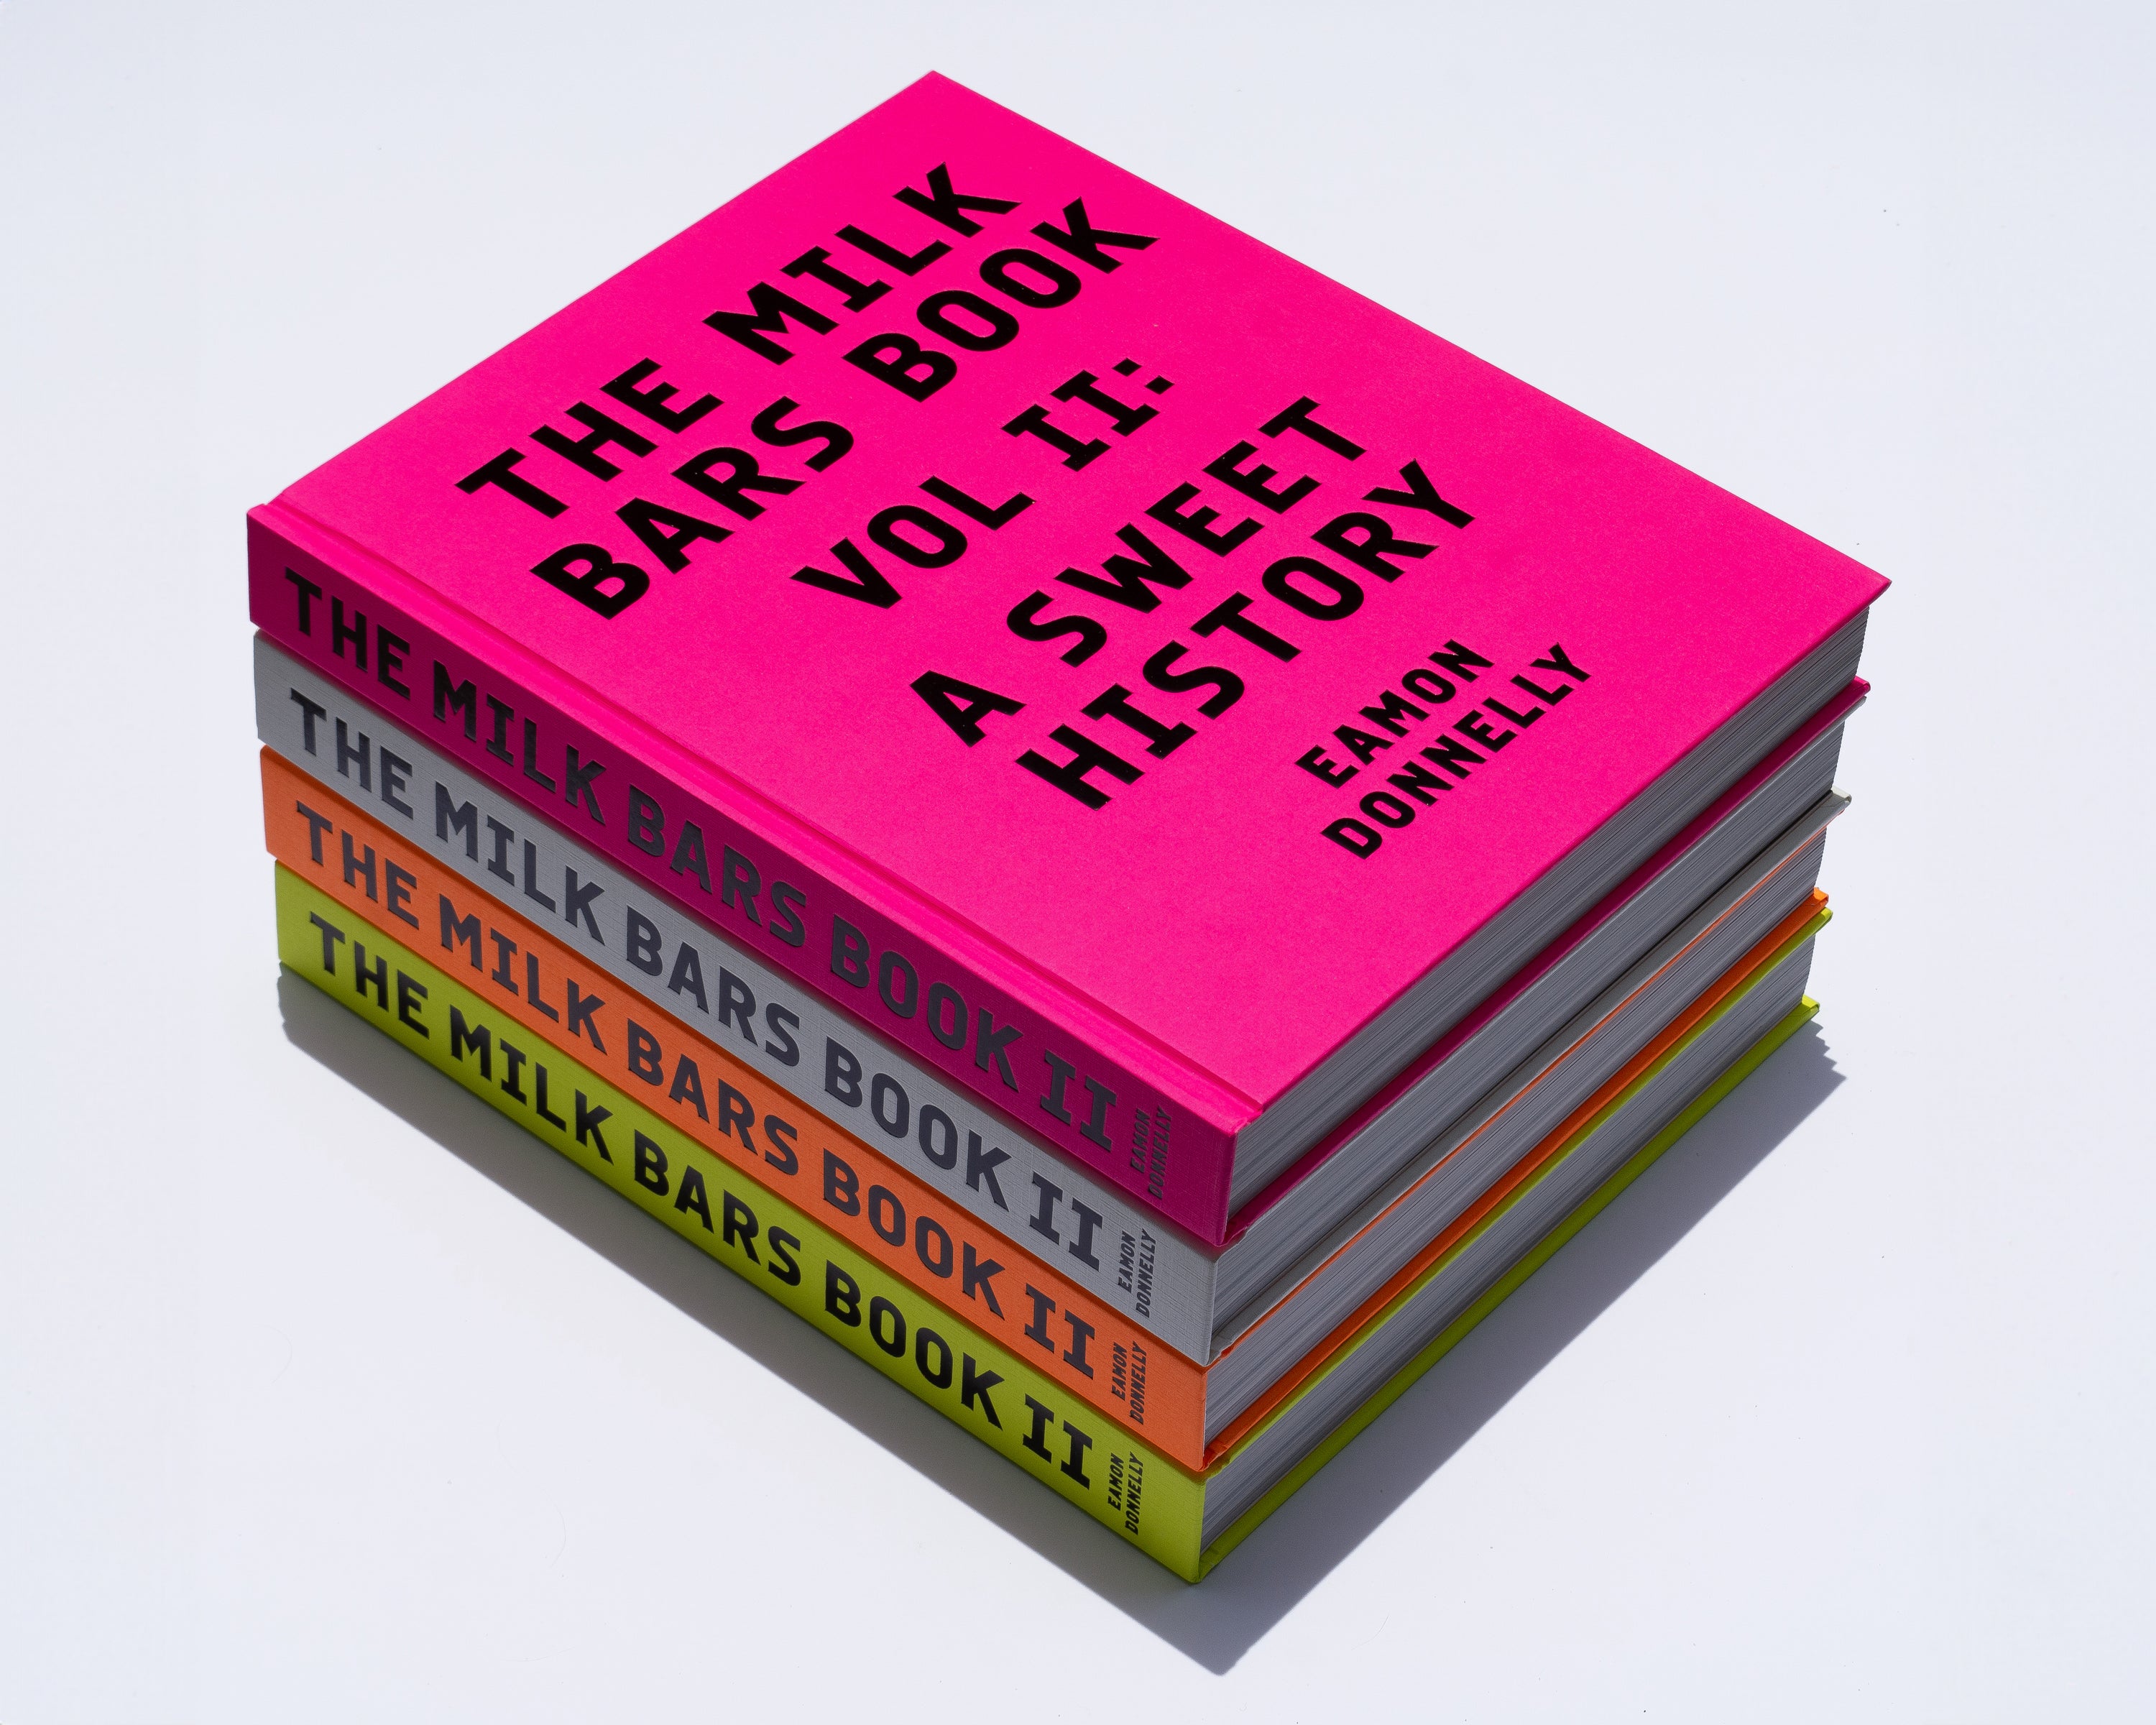 The Milk Bars Book. Volume II: A Sweet History — Bundle Discount "Collect Them All!"